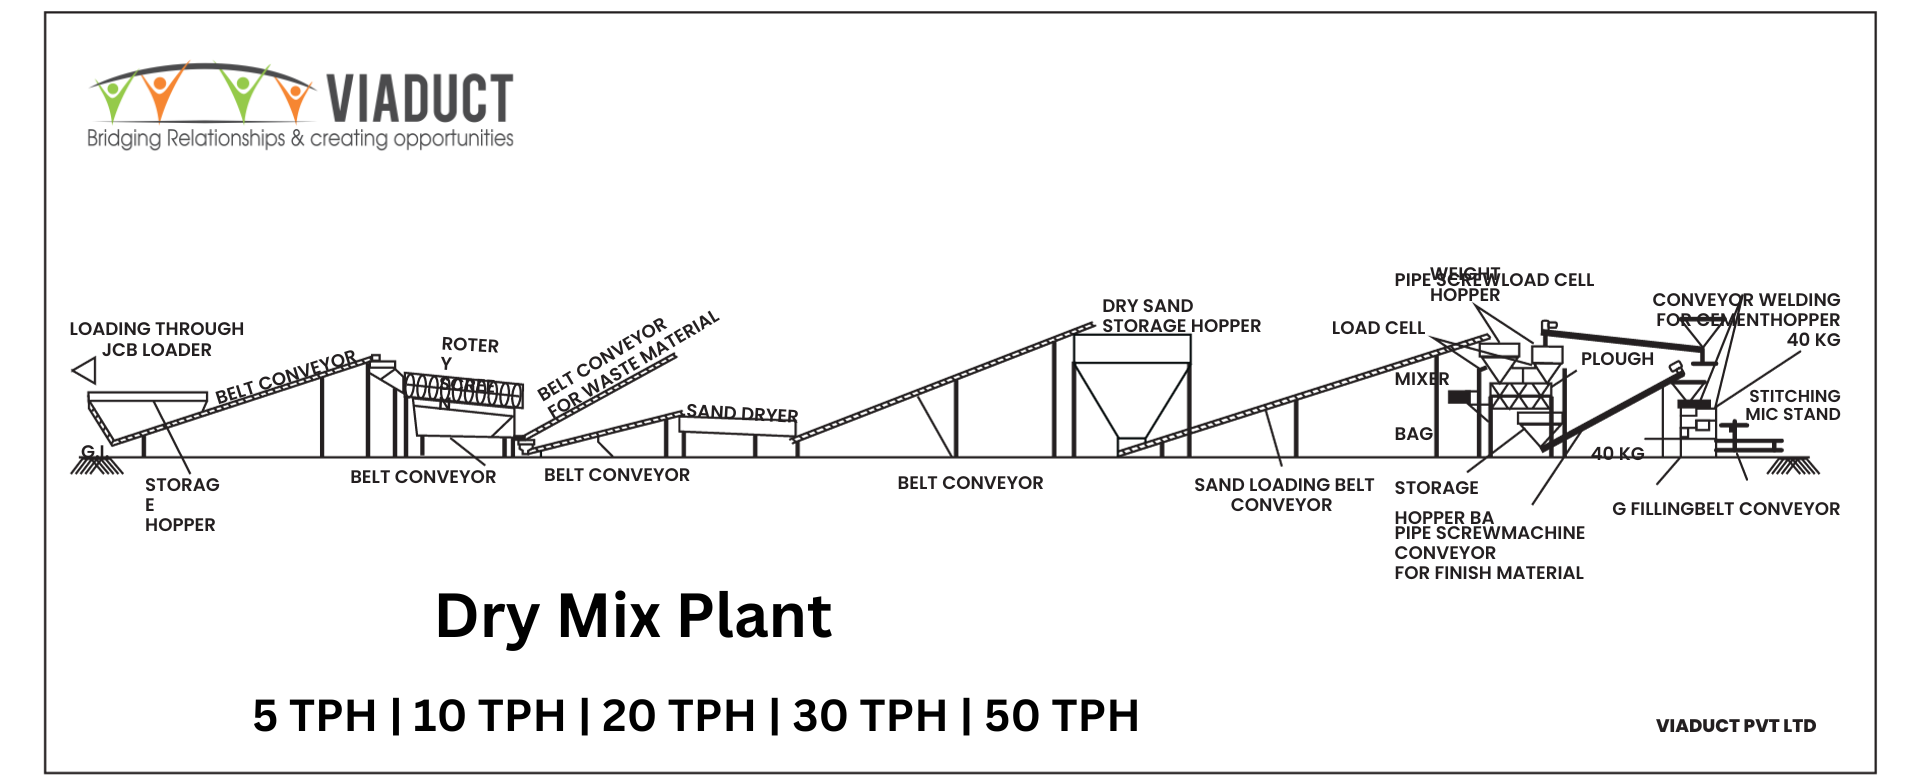 Viaduct Dry Mix Plant Manufacturer and Installation in India